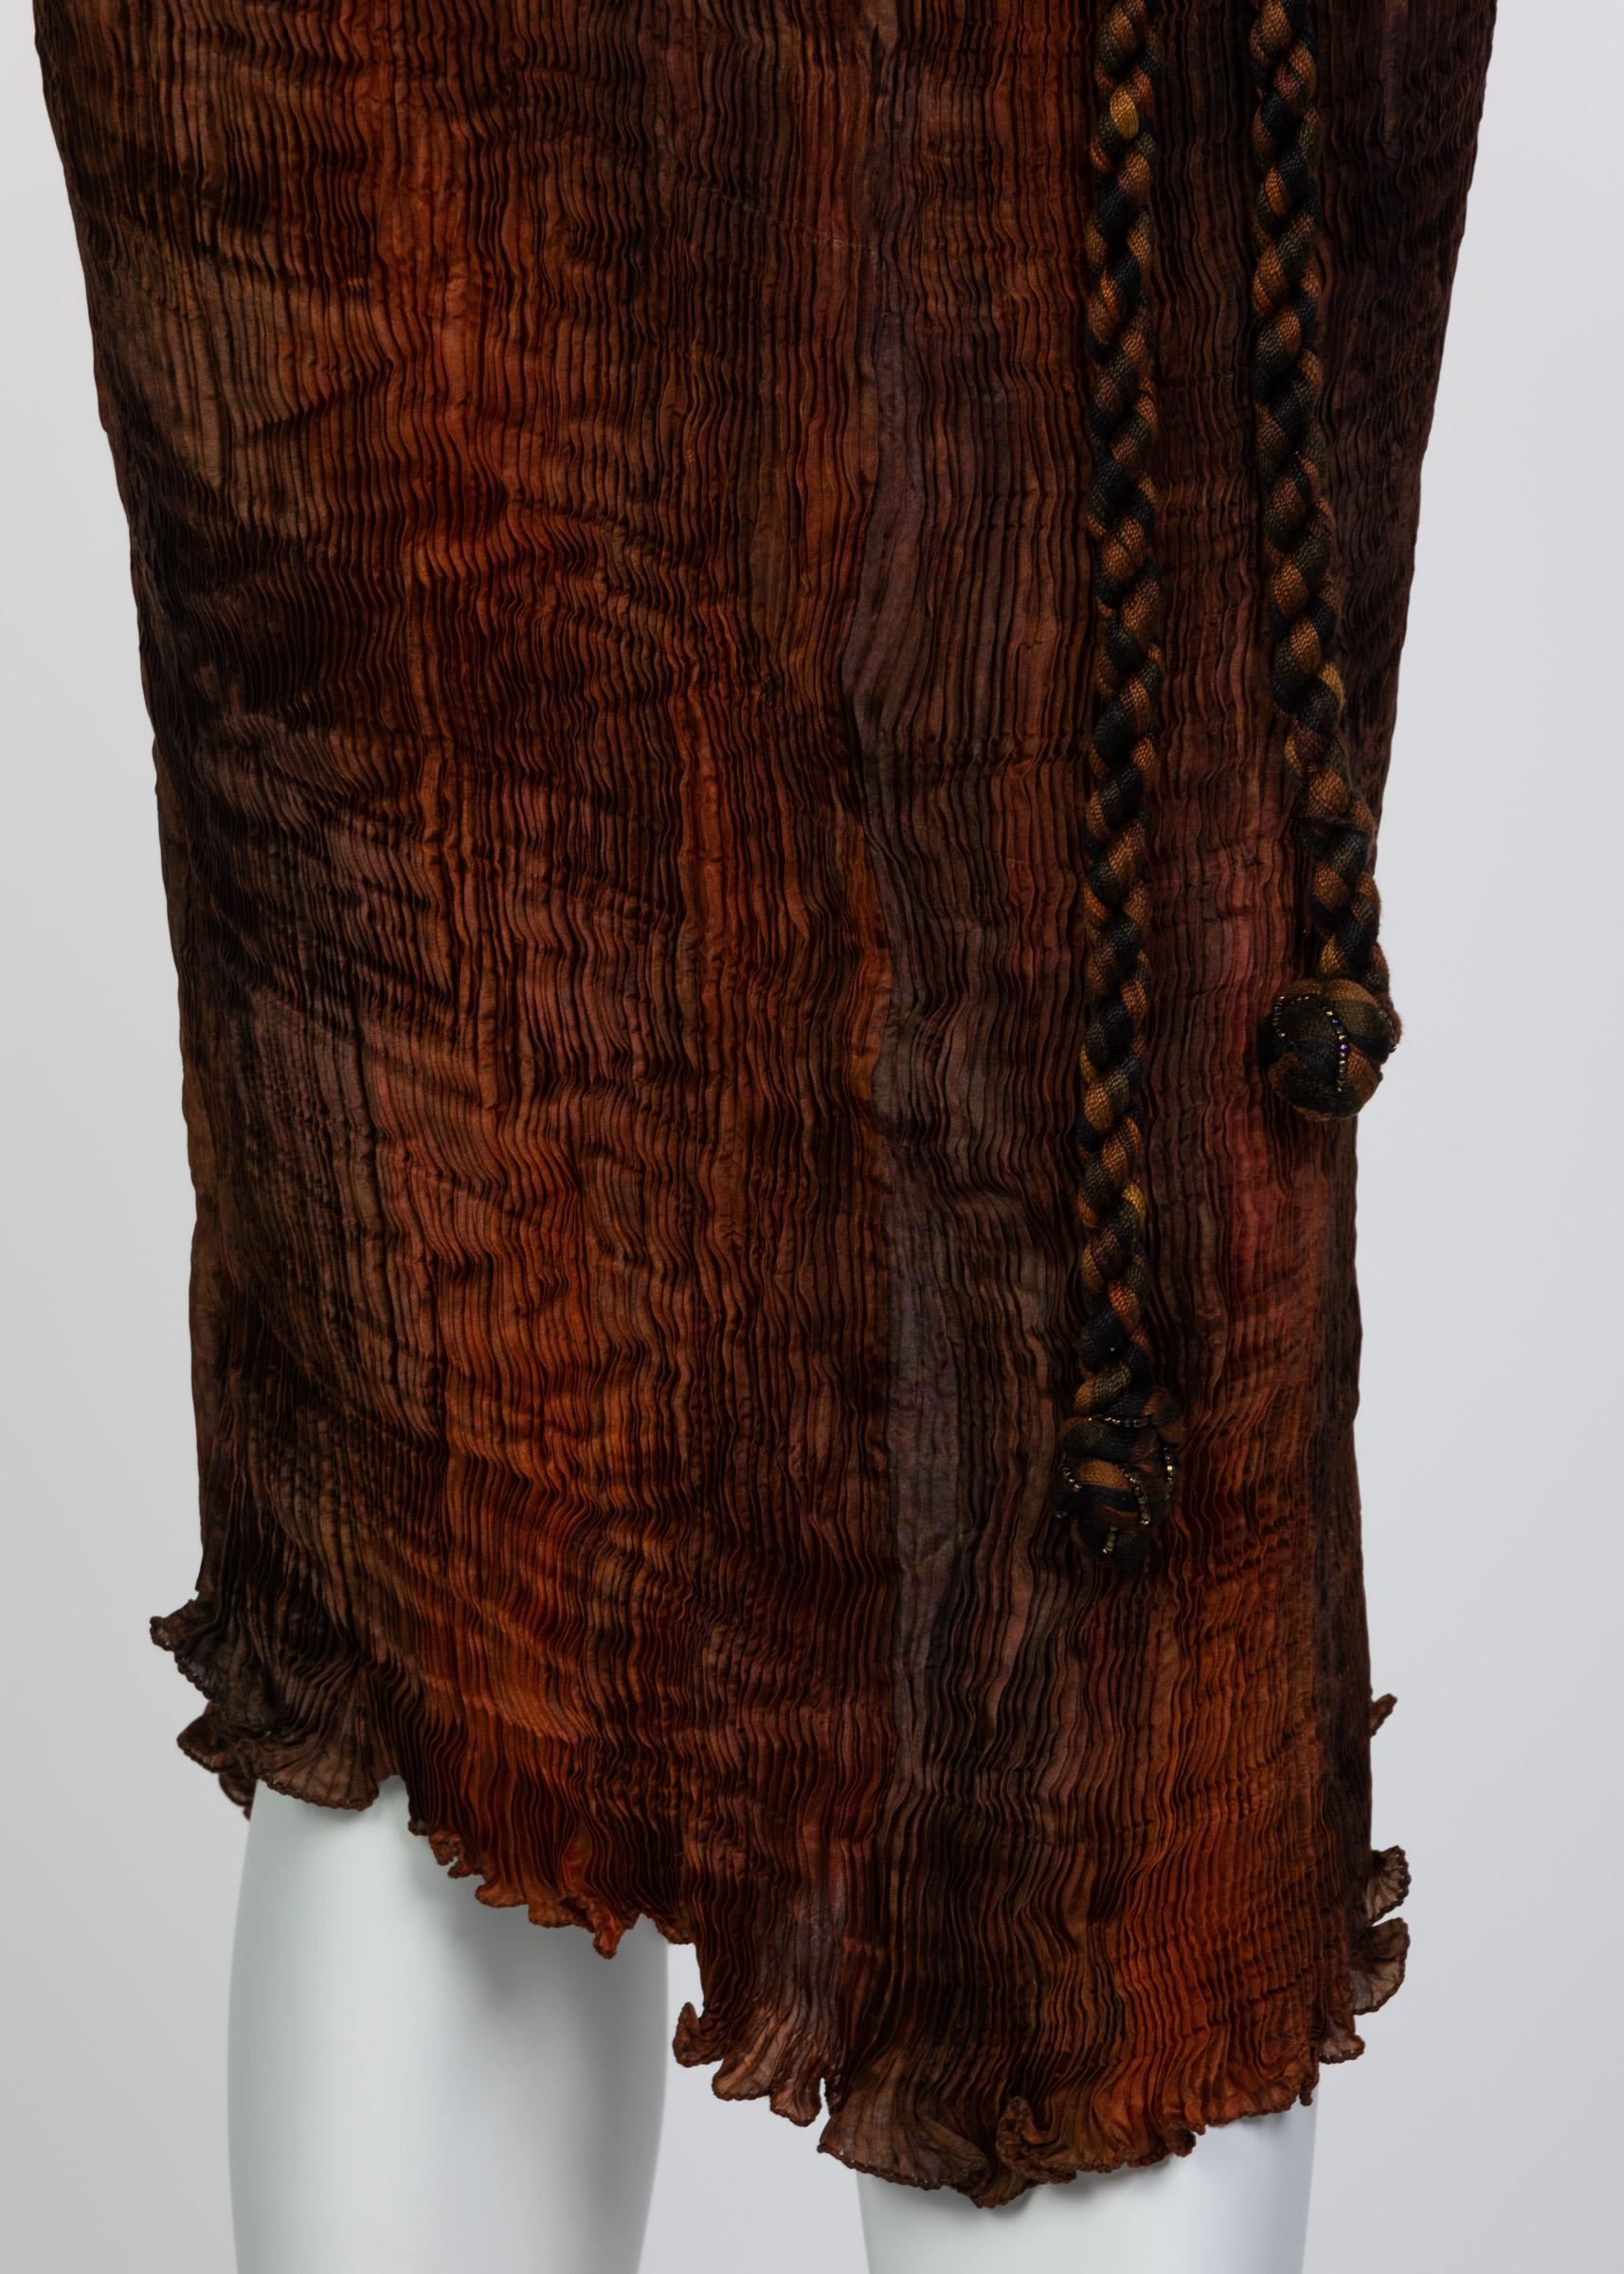 Patricia Lester Copper Brown Silk Fortuny Pleated Dress & Belt, 1980s 2